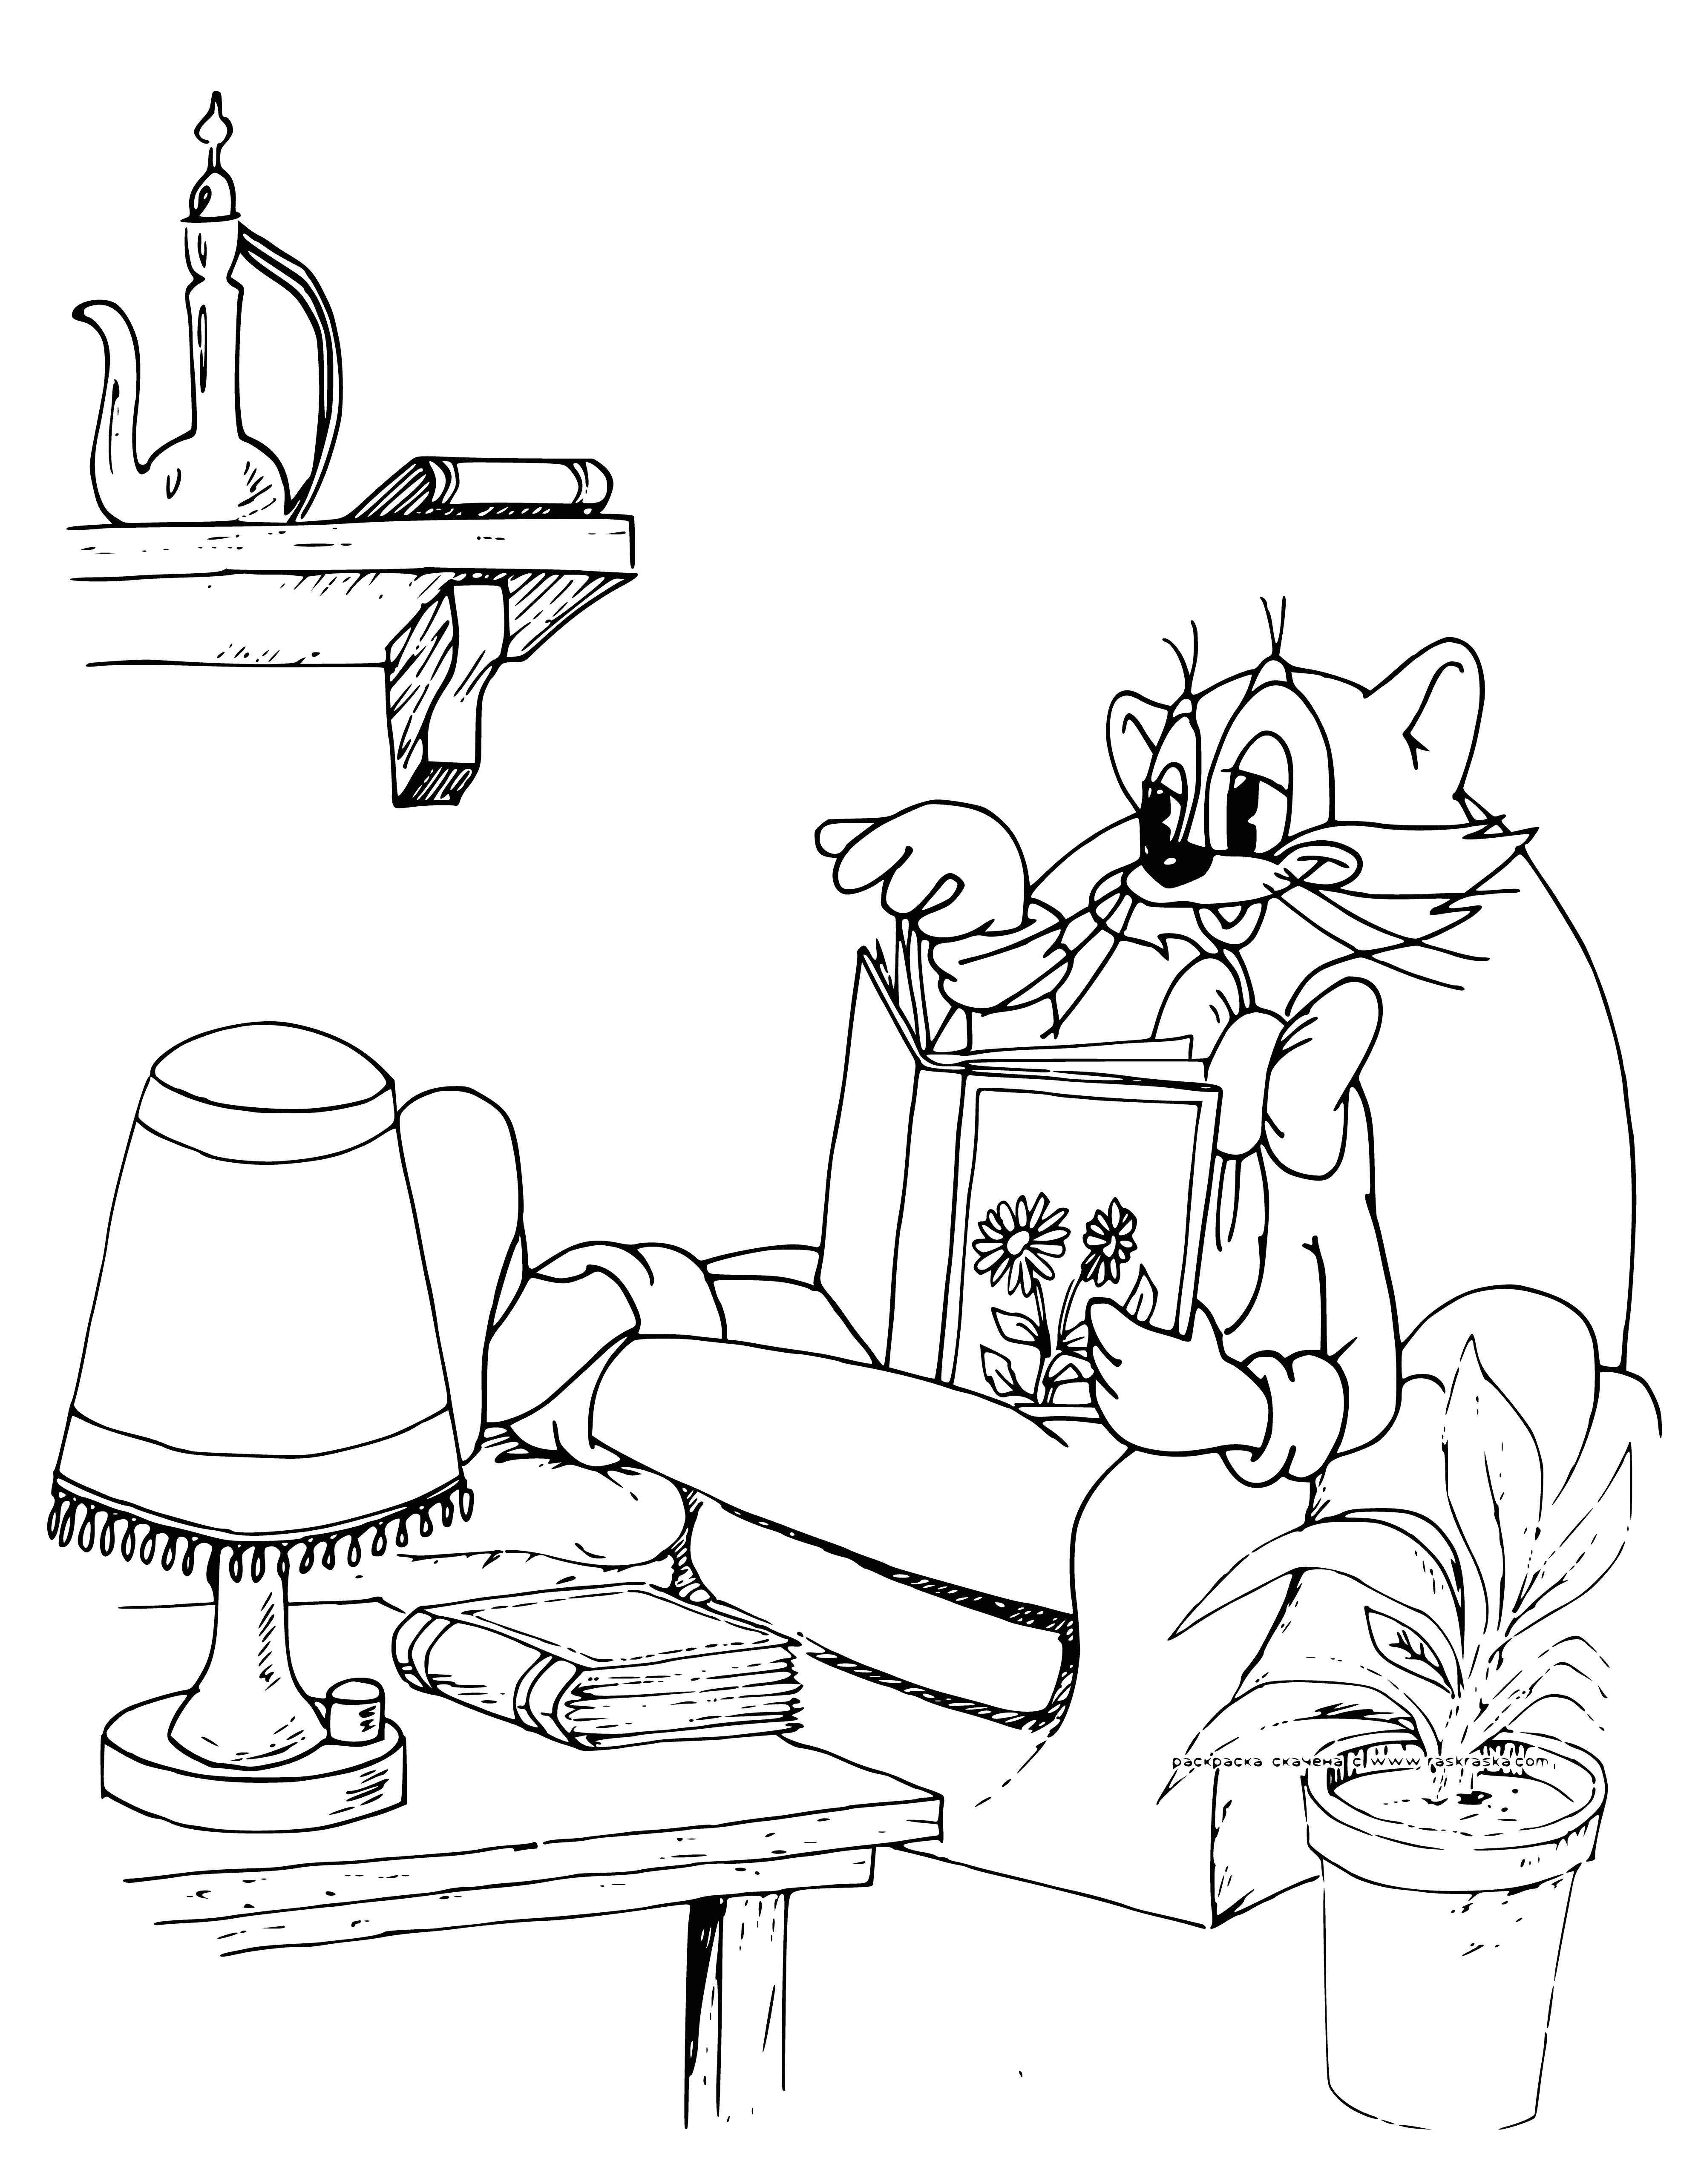 coloring page: Black cat in beige armchair with yellow eyes and blue collar with bell, tongue sticking out.